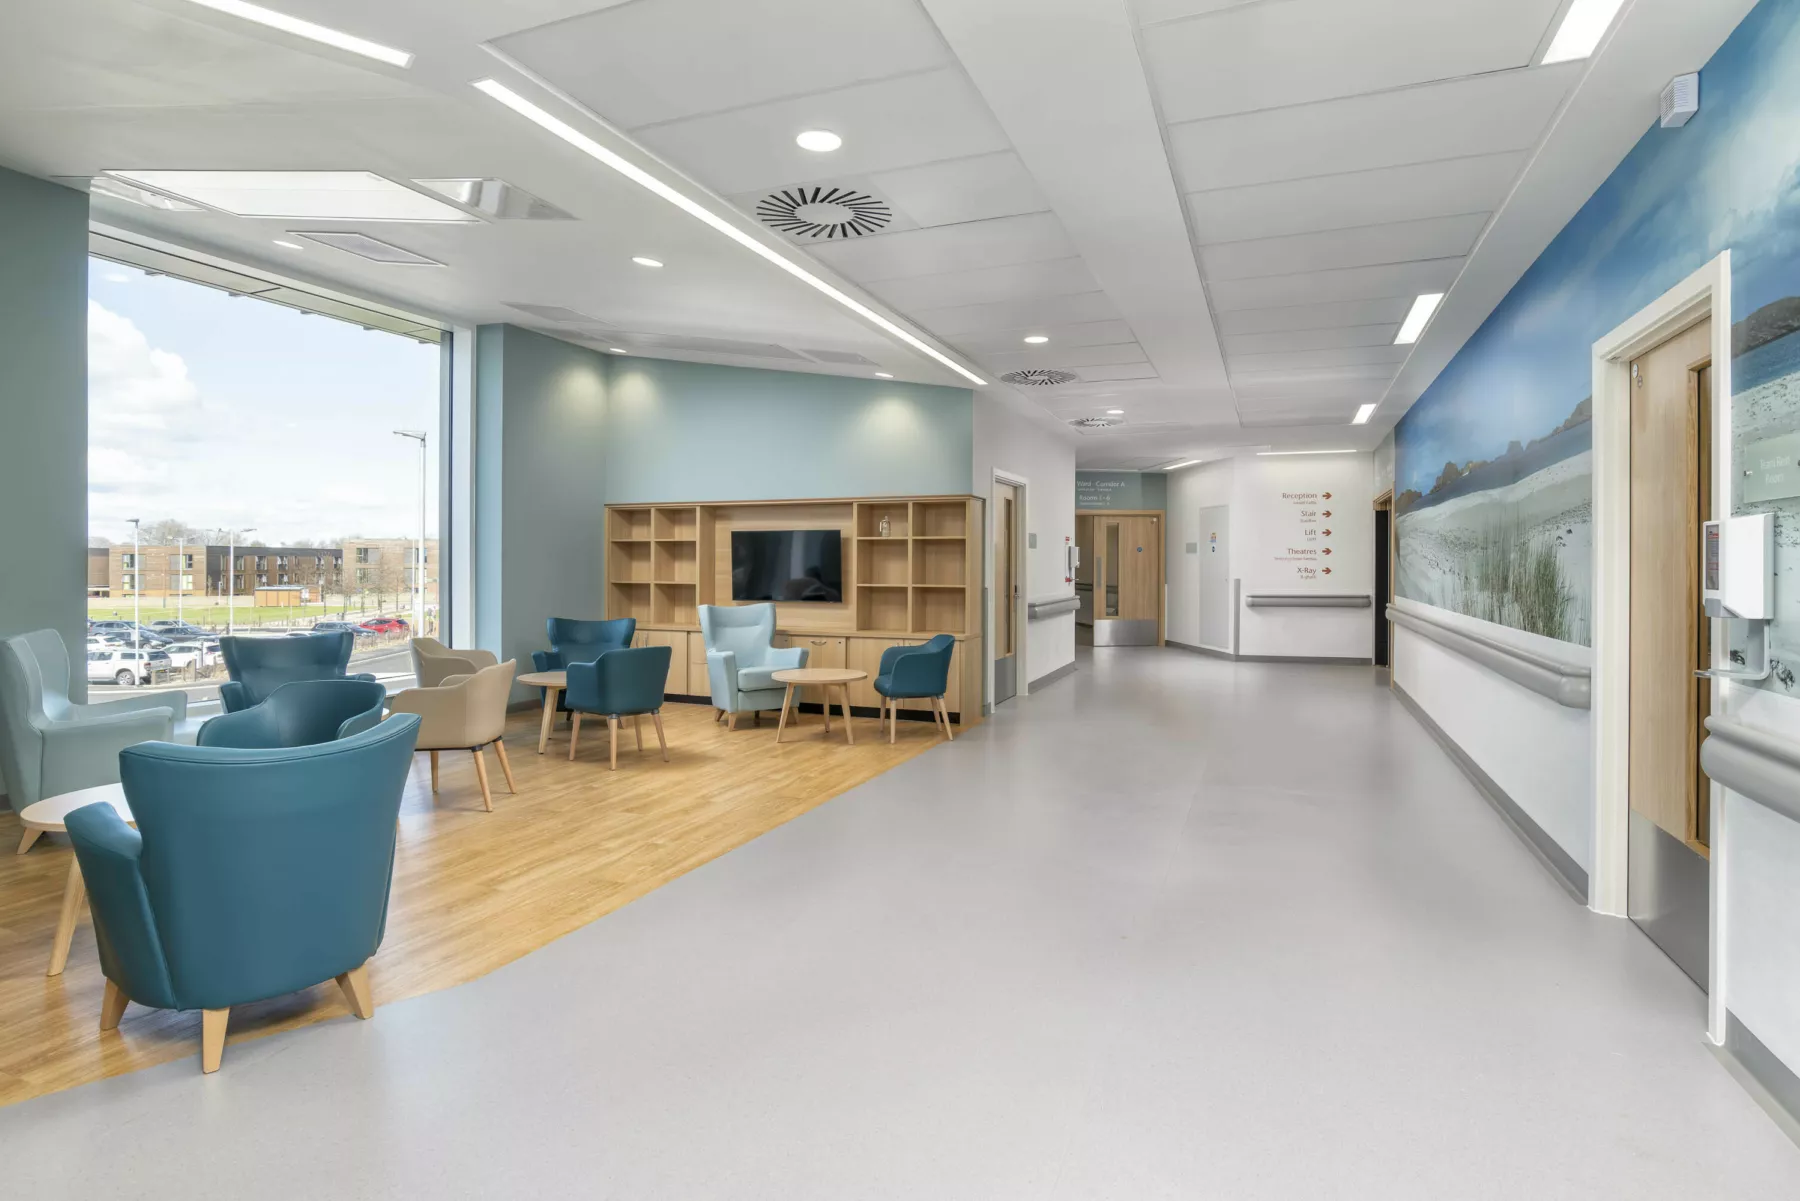 First floor waiting area at National Treatment Centre - Highland. Armchairs in turquoise and tan in an area with wooden floor off the main corridor.